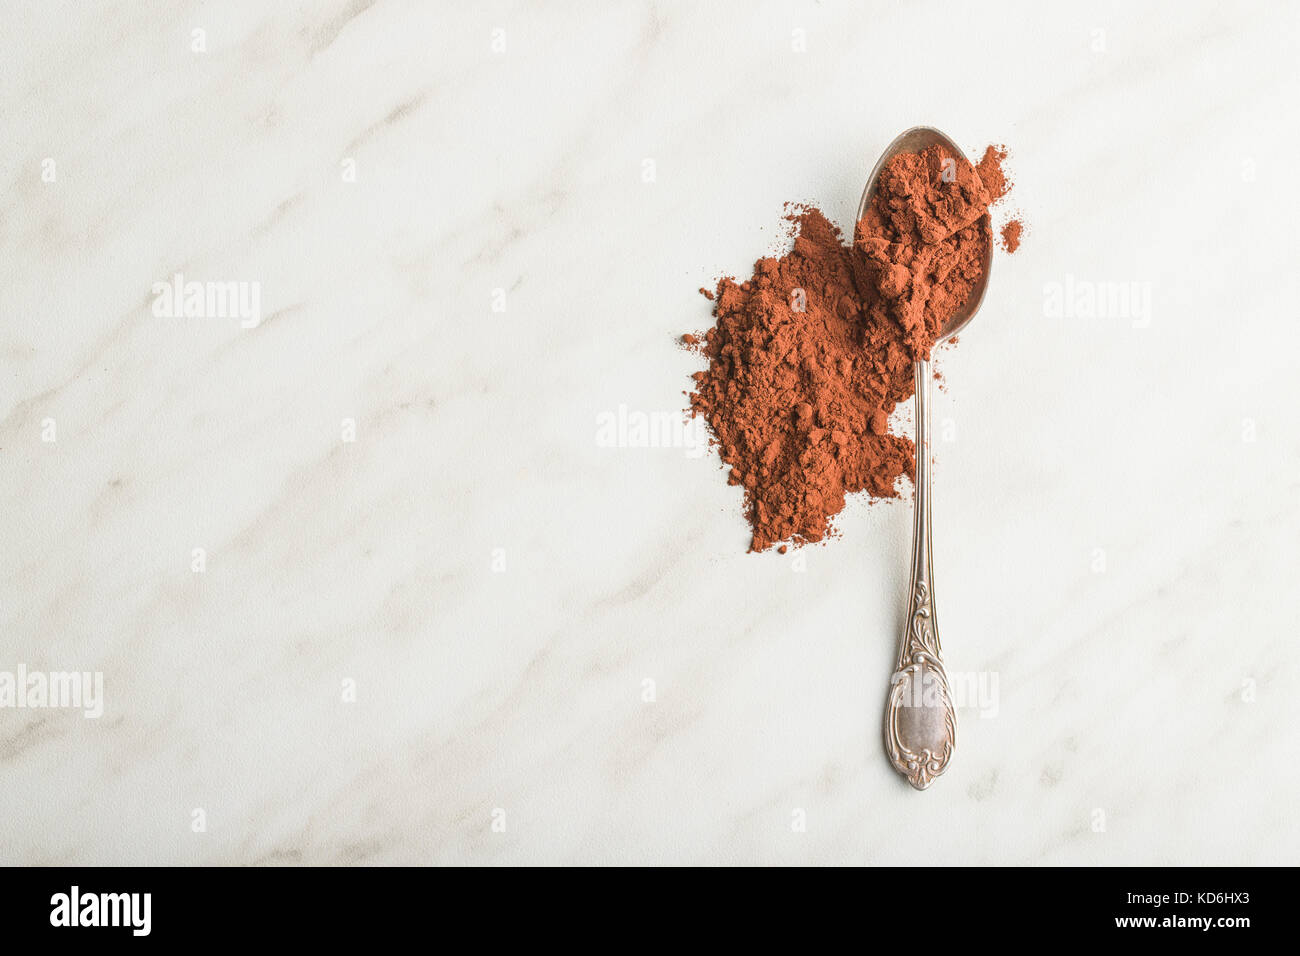 Dark cocoa powder in spoon on white table. Top view. Stock Photo